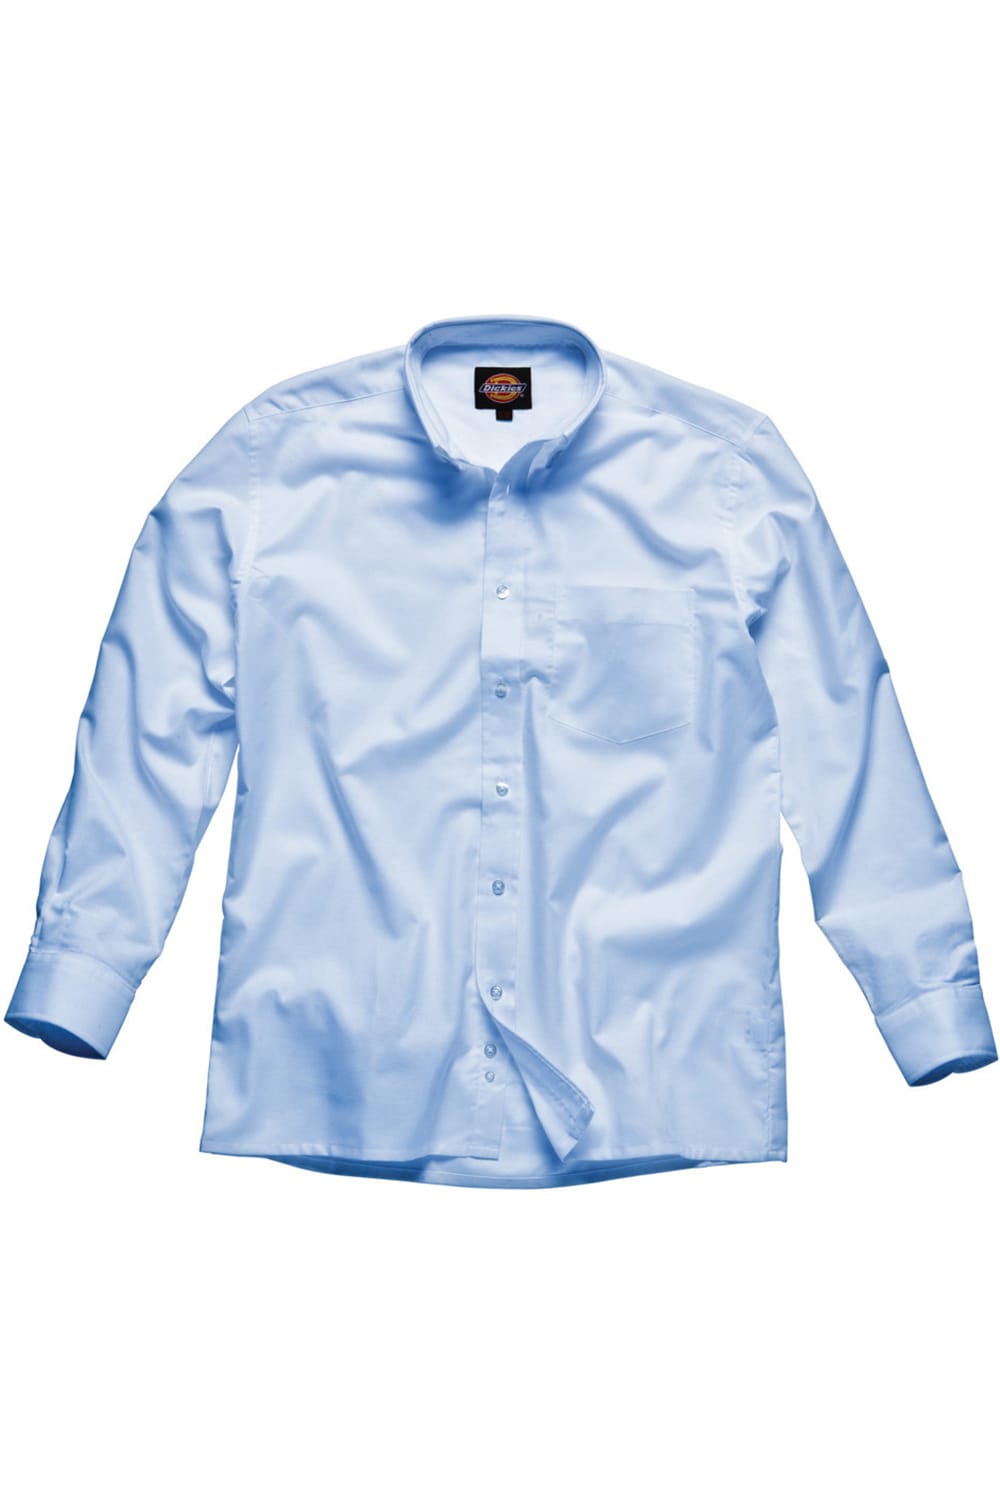 Dickies Long Sleeve Cotton/Polyester ...